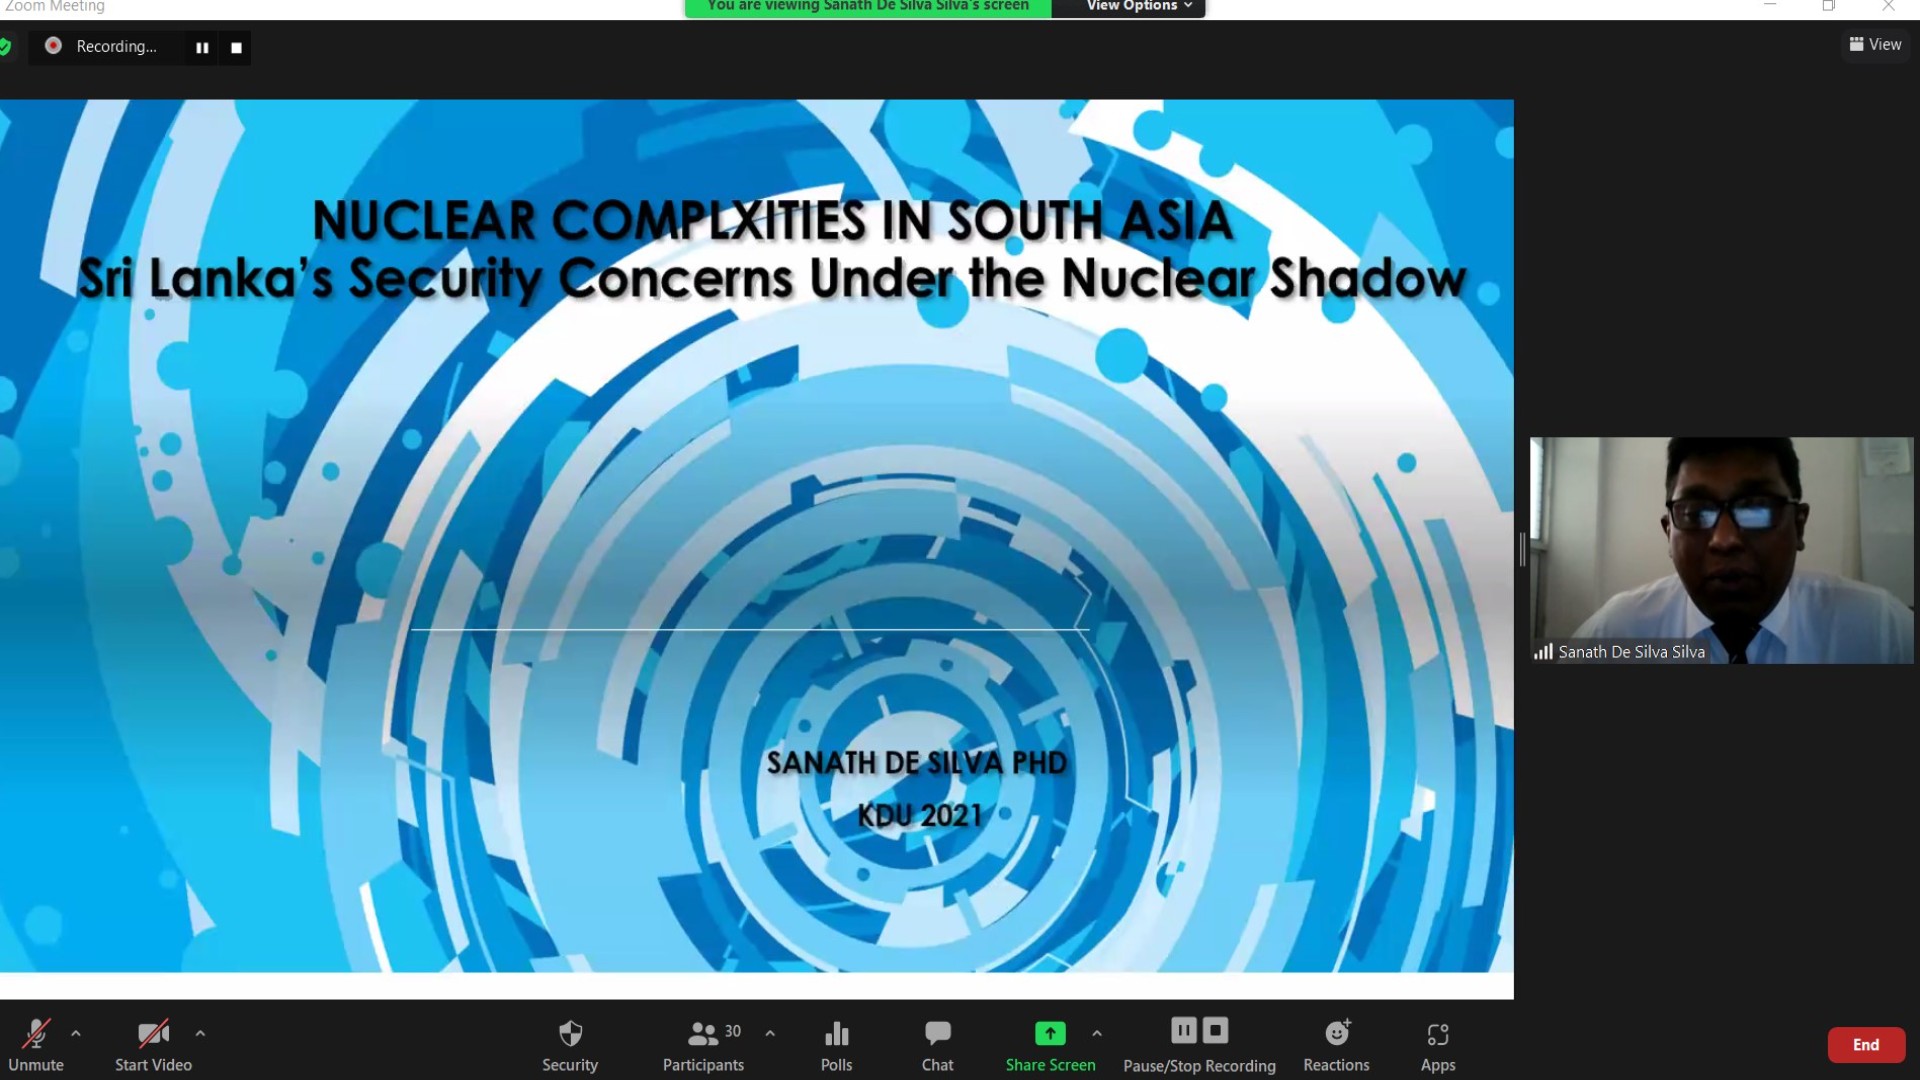 YSF Webinar on Nuclear Complexities in South Asia